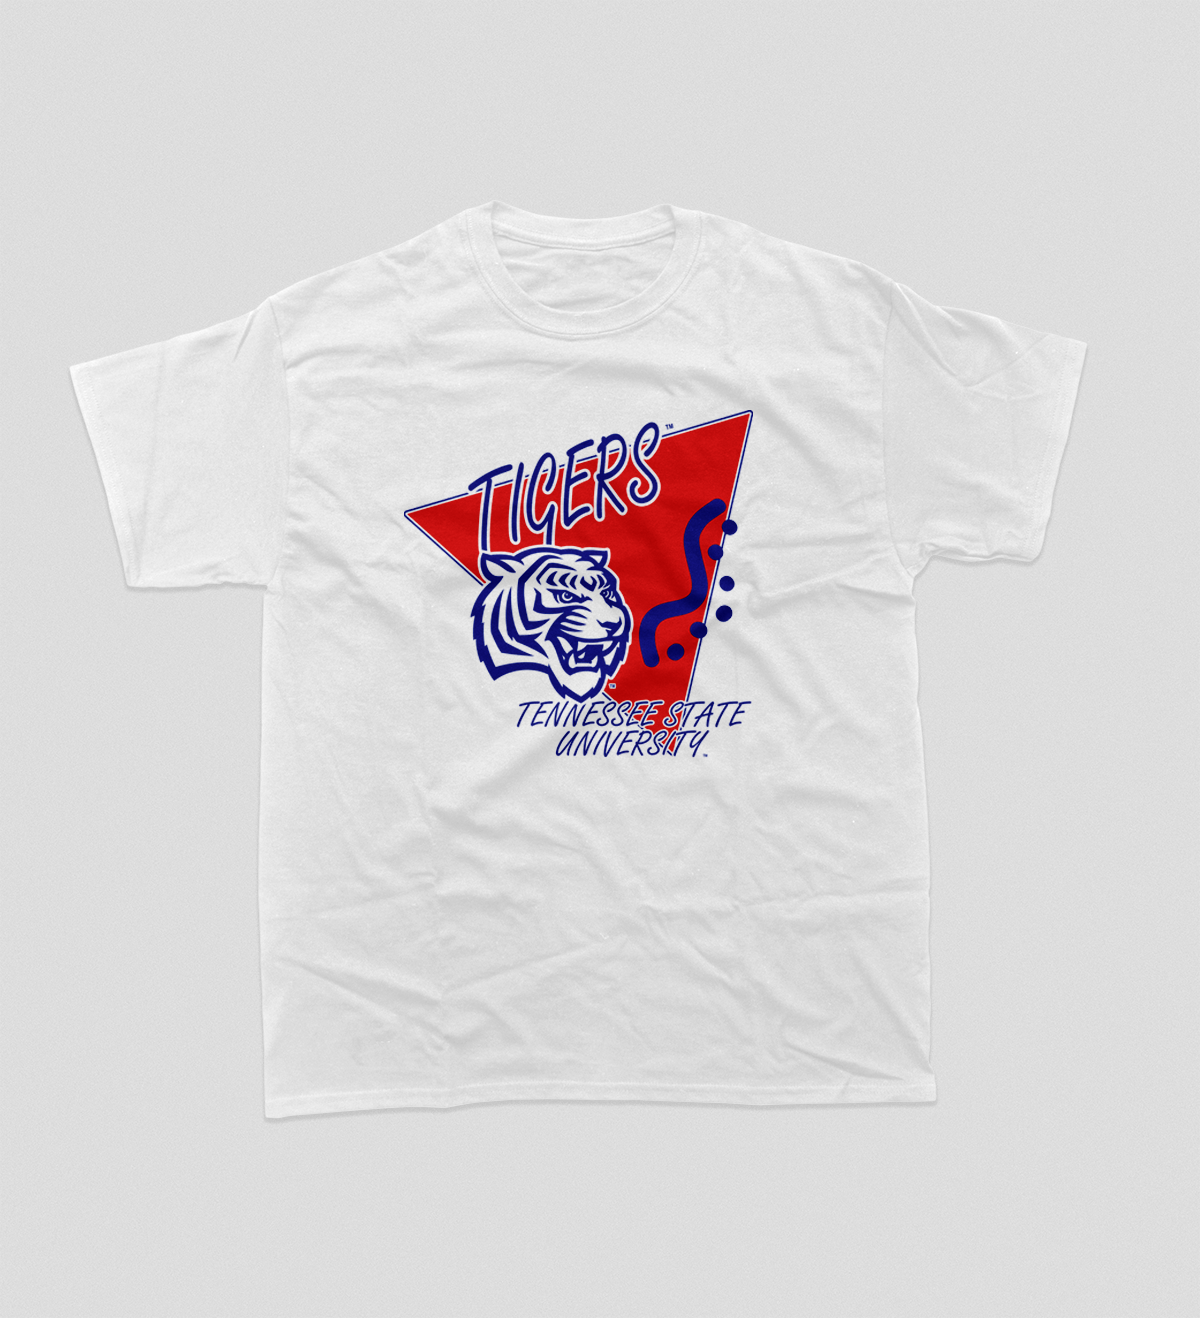 Tennessee State Beeper T-shirt